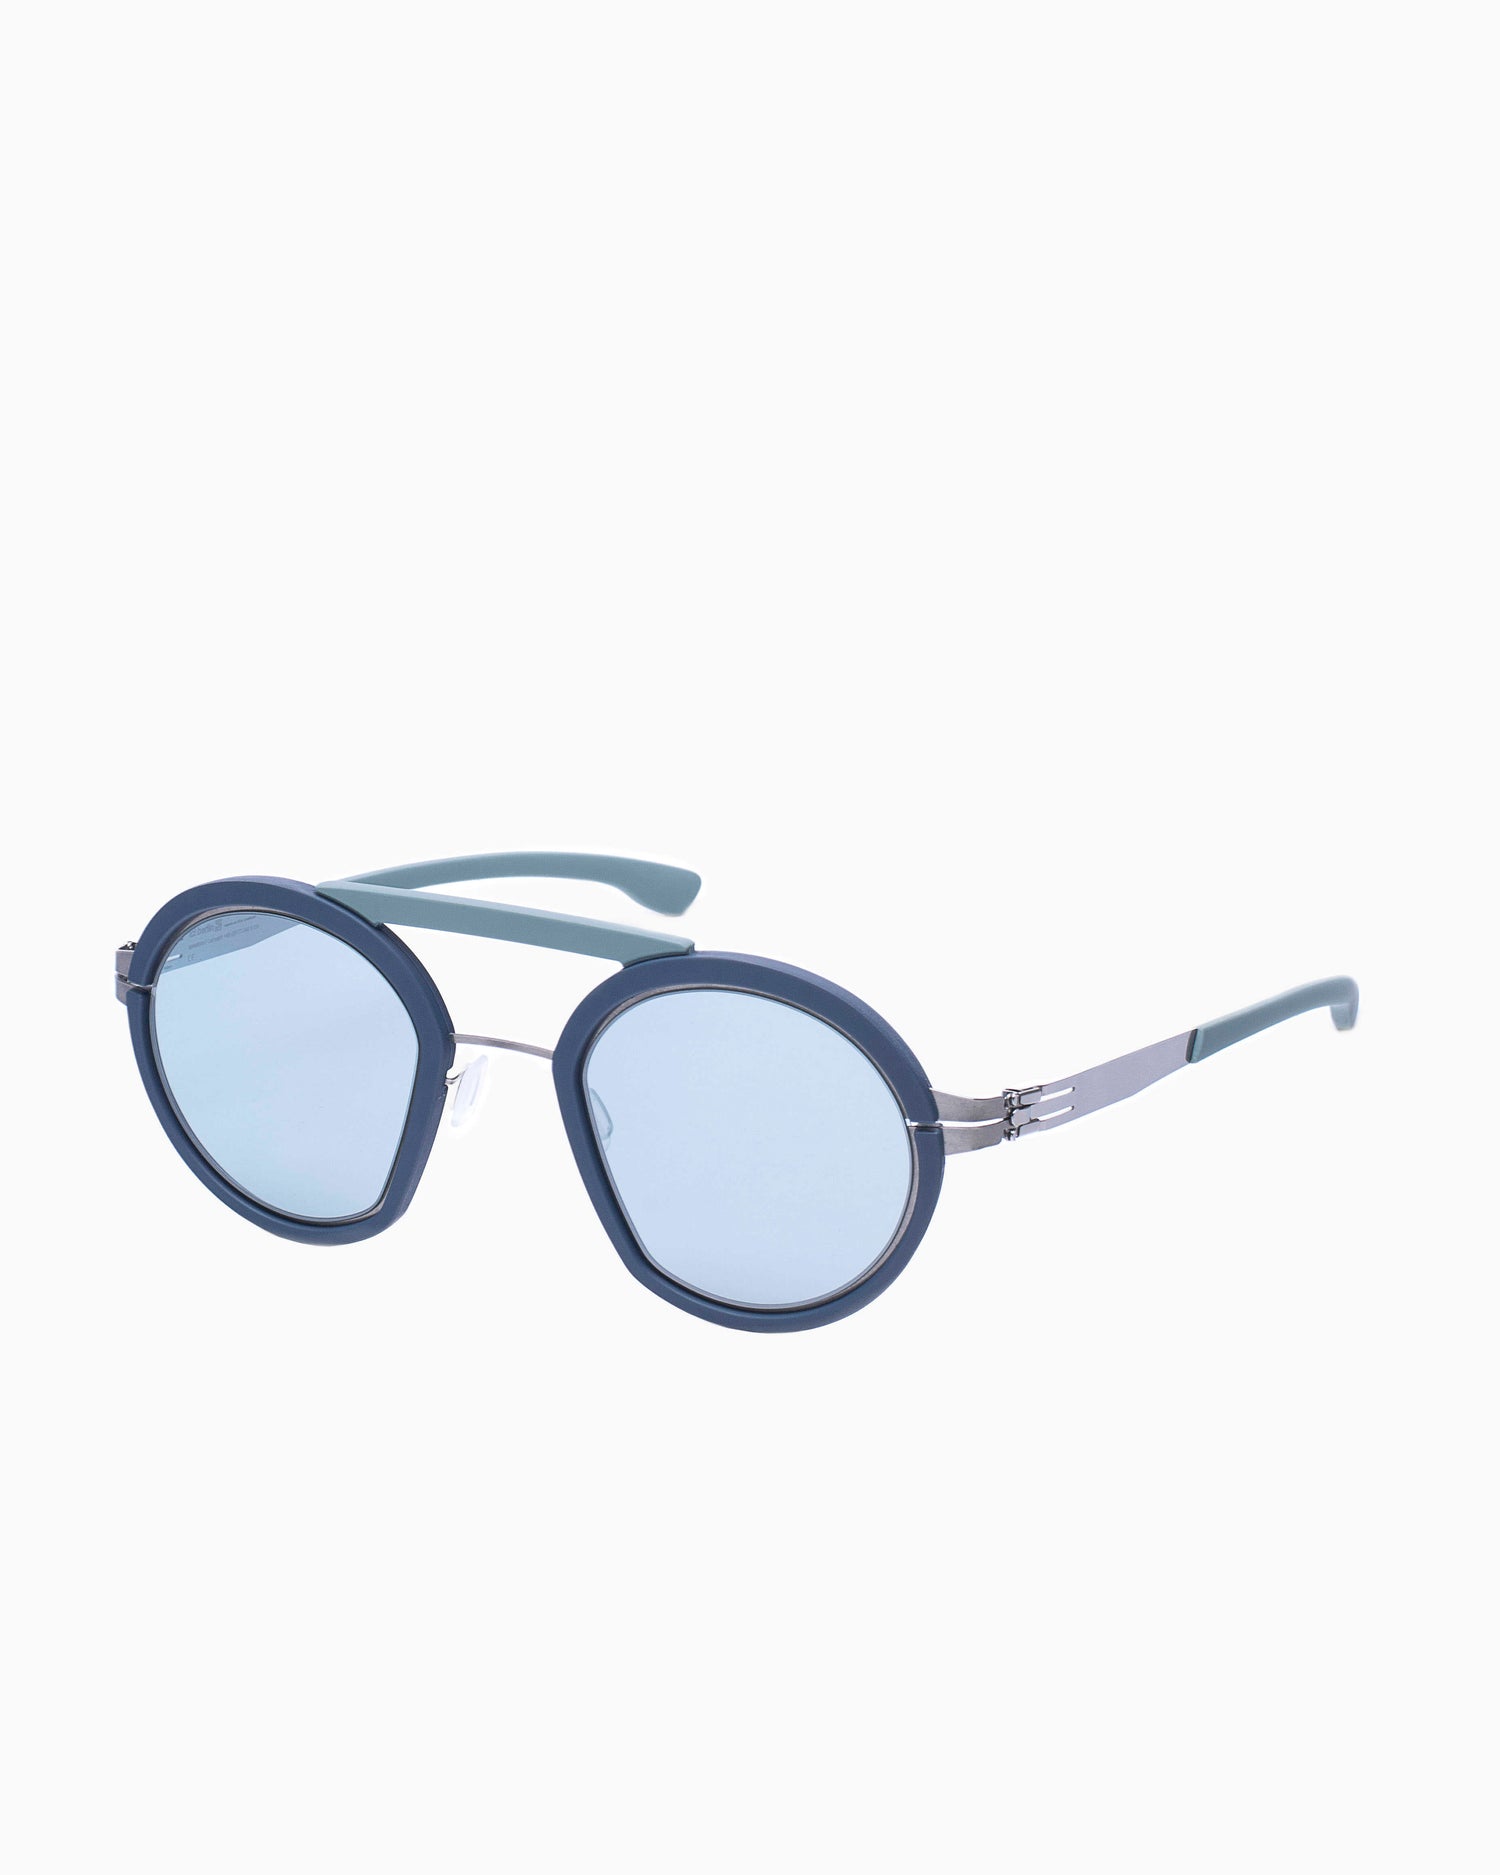 Ic Berlin - thesupervillain - chrome-blue-mint | glasses bar:  Marie-Sophie Dion